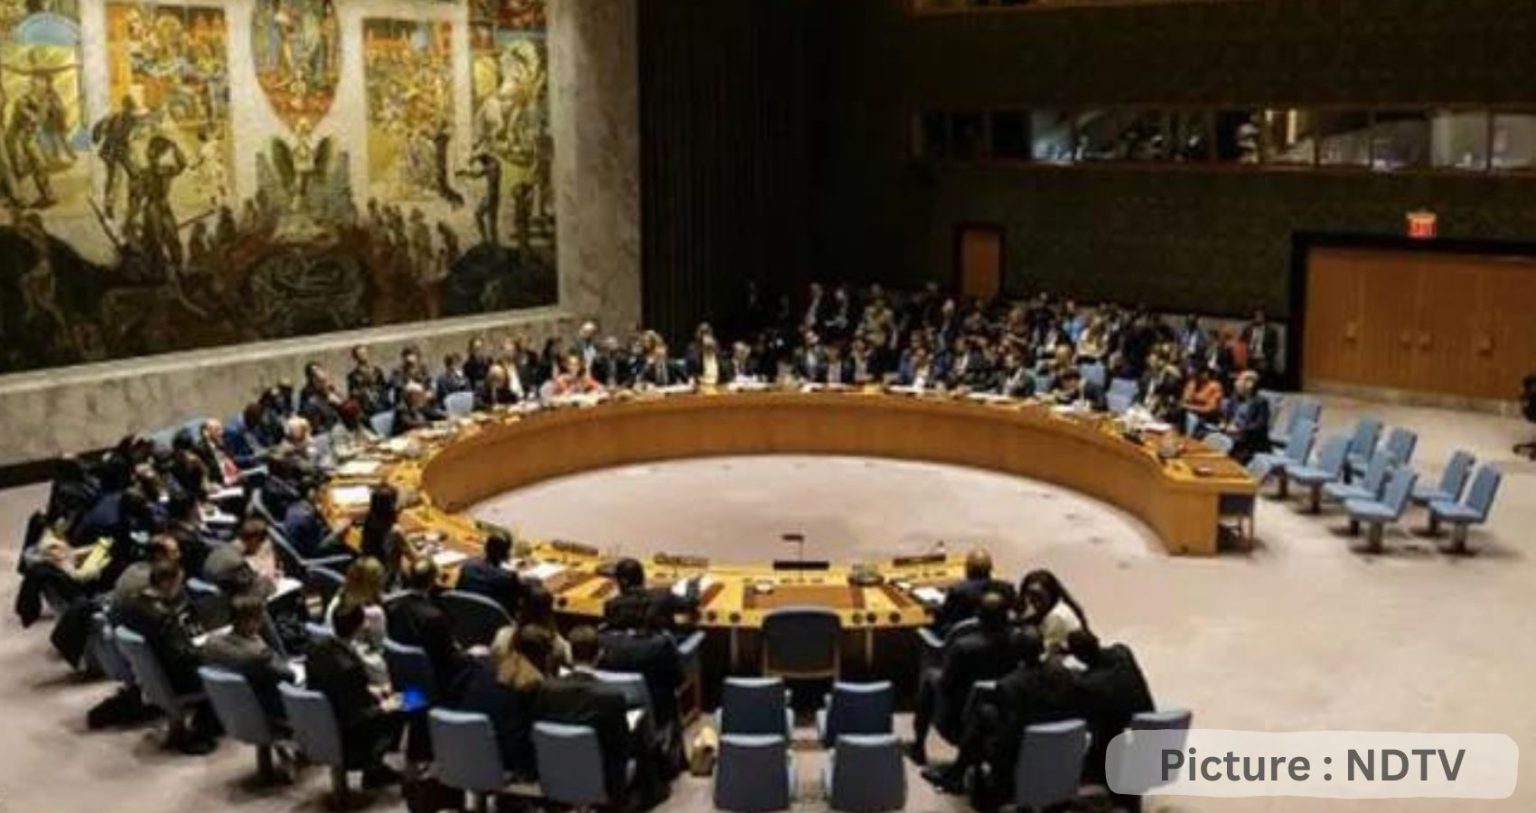 Reform Of UNSC And Terror Will Be Focus As India Assumes UNSC Chair